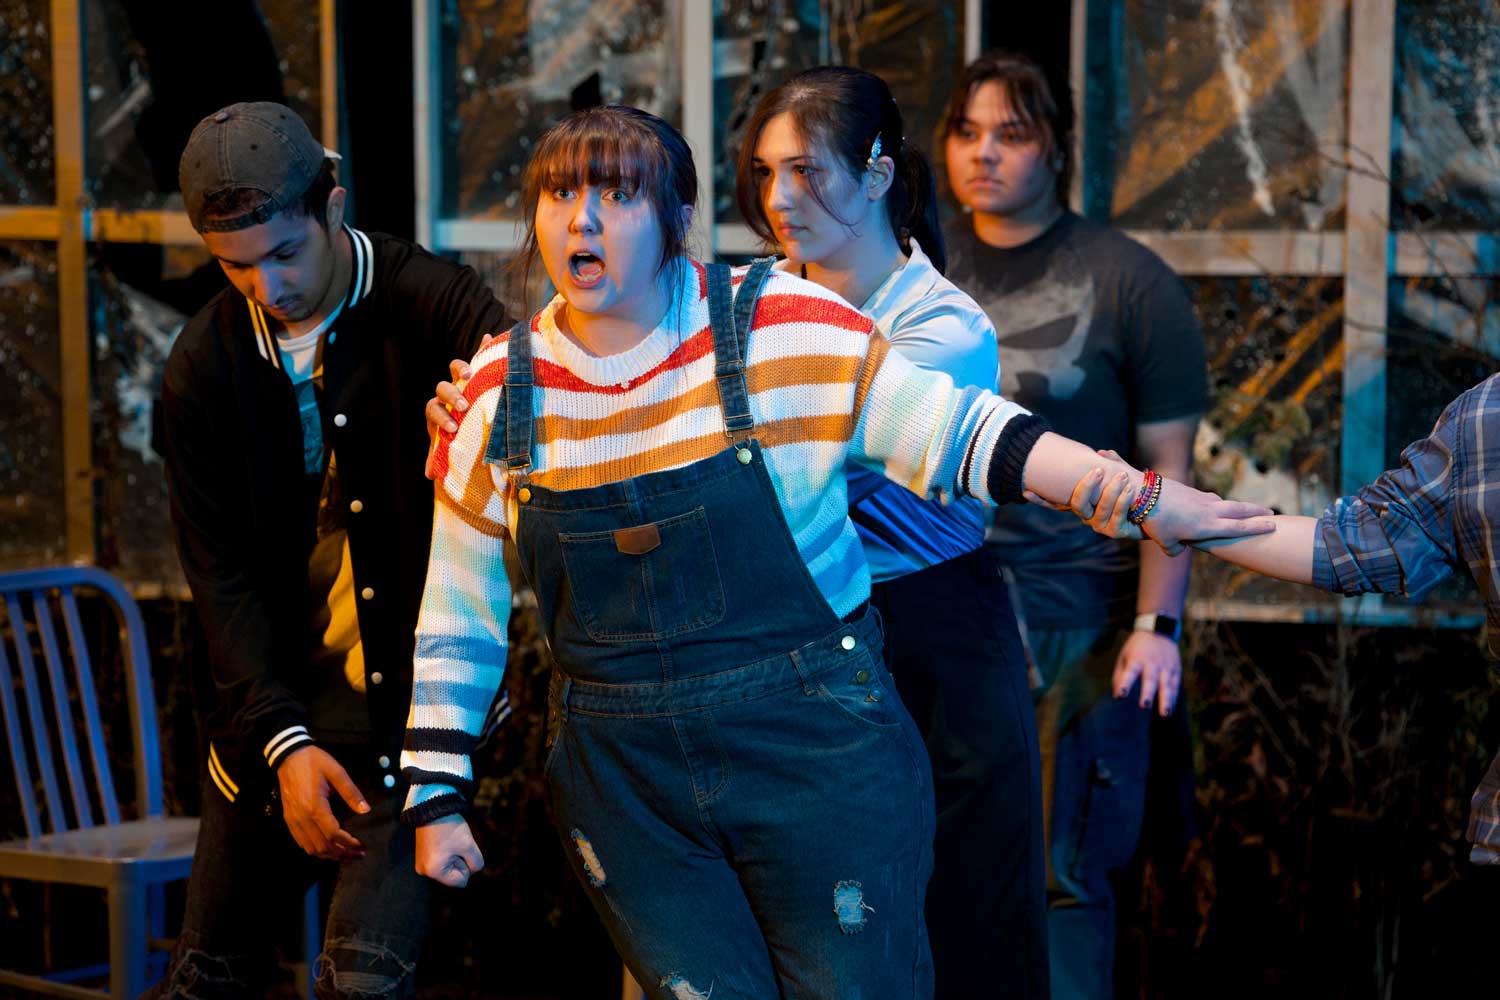 A group of students acting in a play